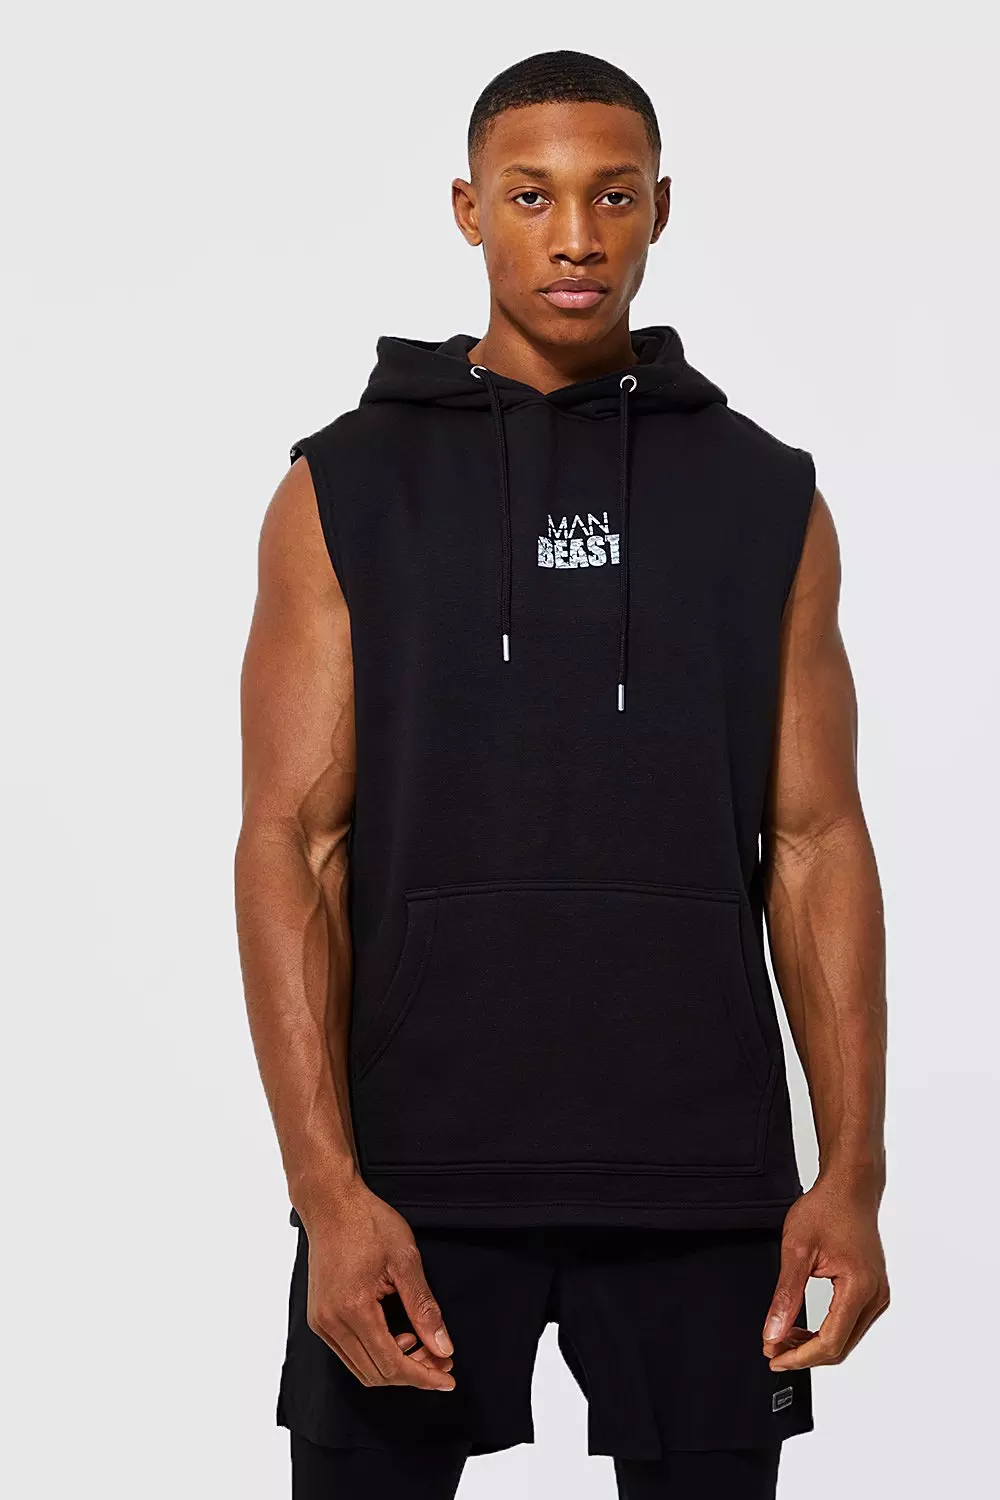 And1 Men's and Big Men's Active Sleeveless Hooded Athletic Top, Up to Size 3XL, Black